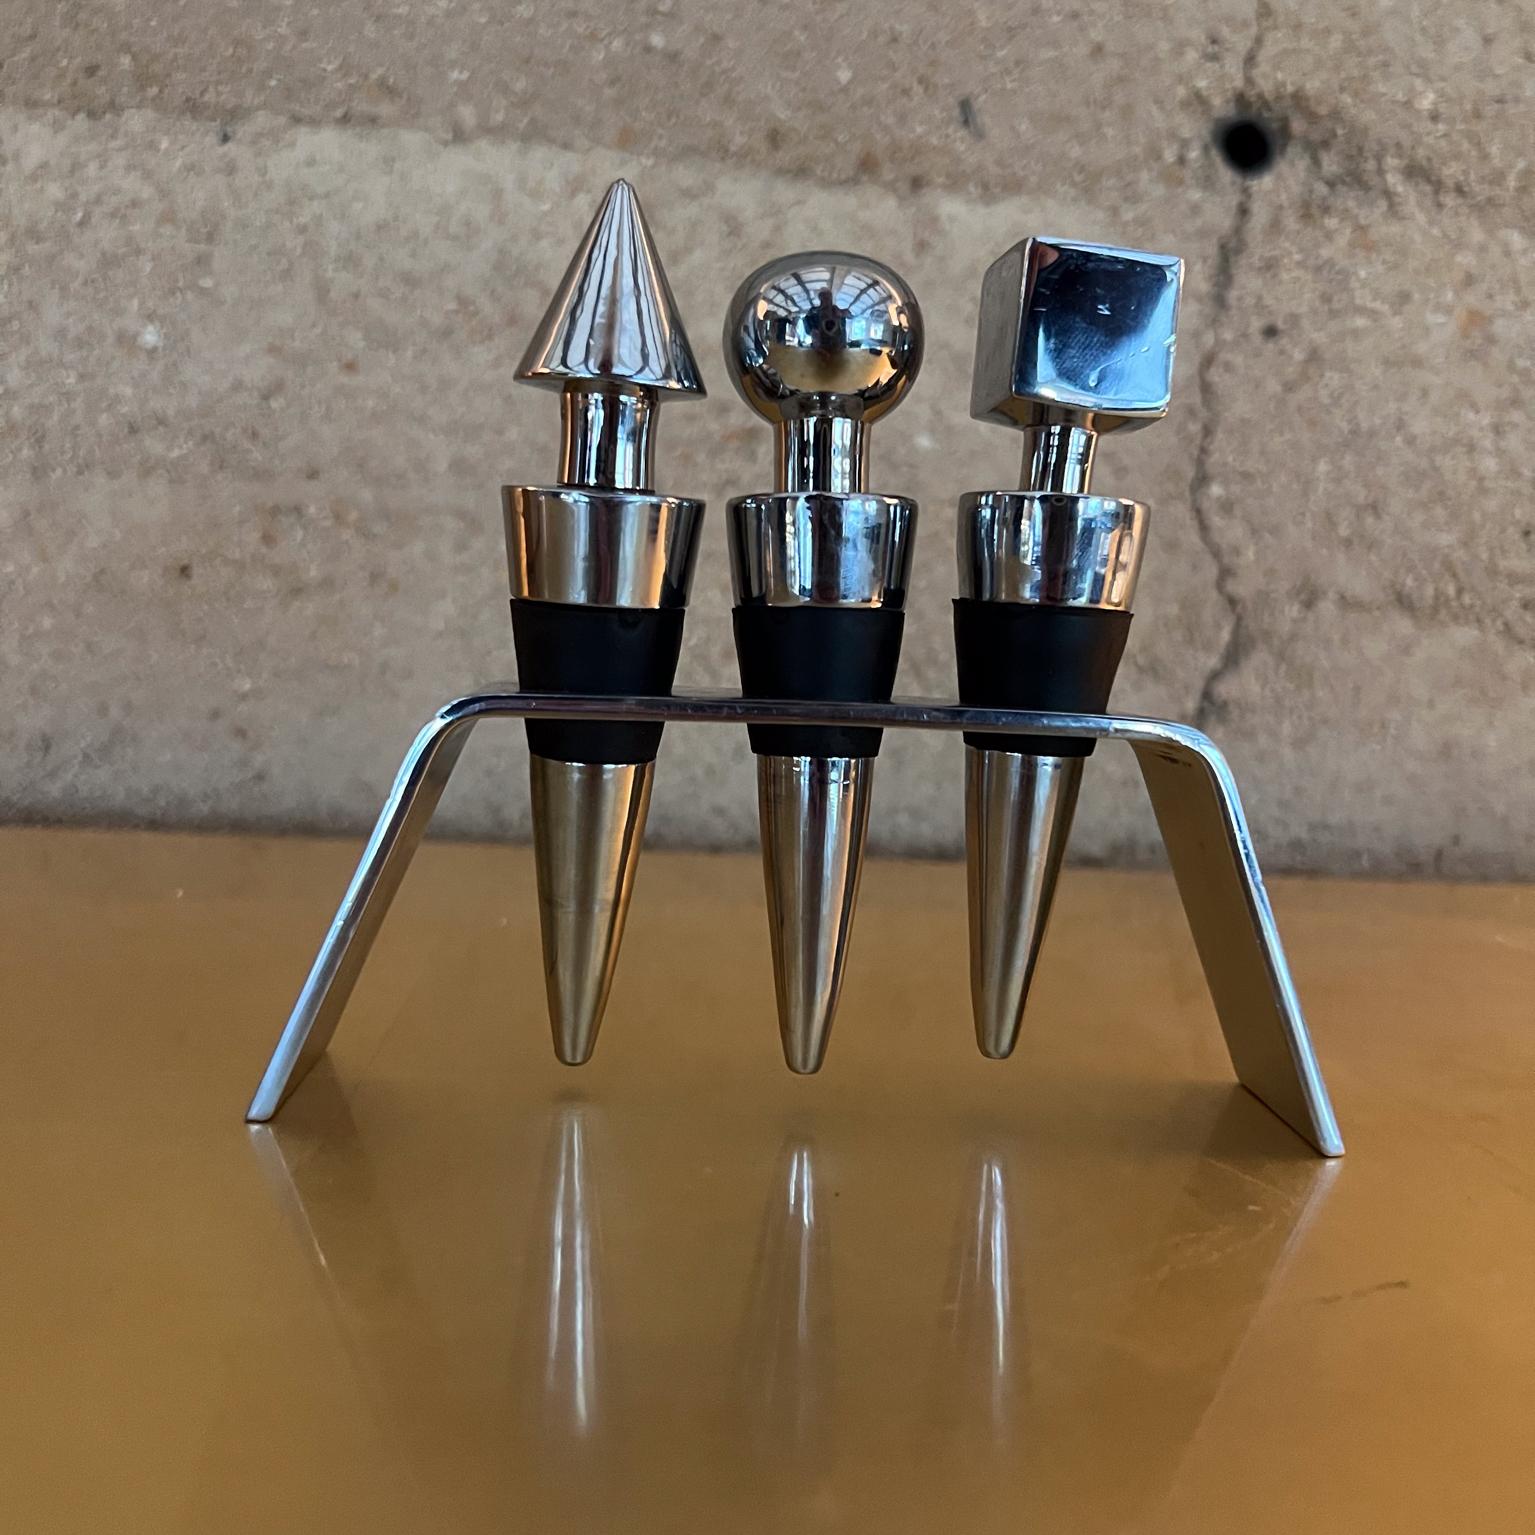 Modern Lauffer Geometric Set of Three Chrome Bottle Stoppers
6 x 3.5 x 2
Boxed and ready to go.
See images provided.